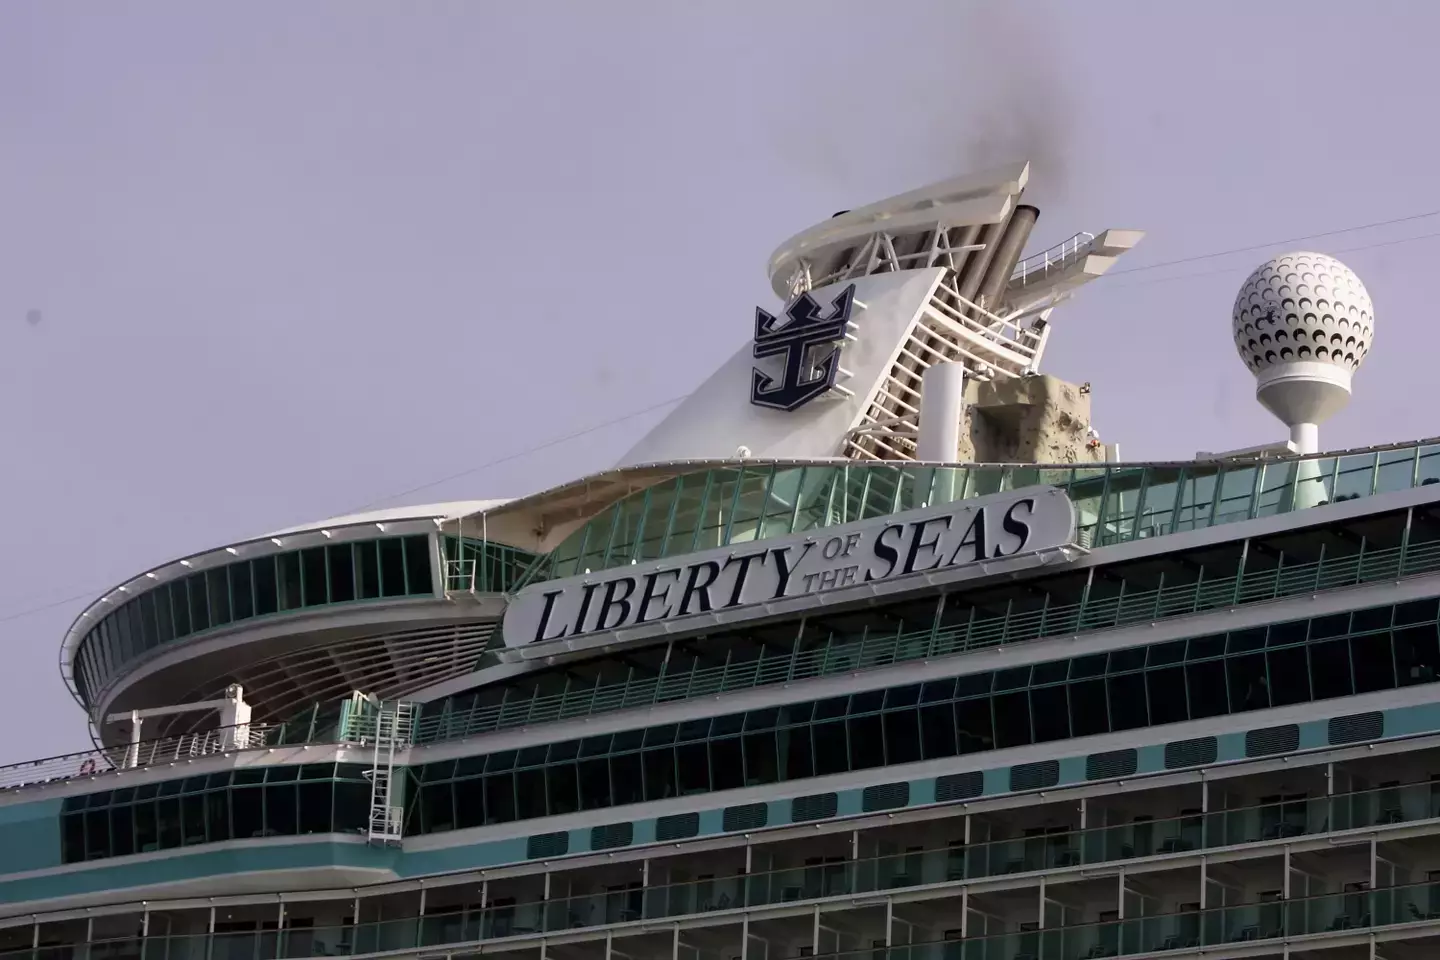 passenger who jumped off cruise ship